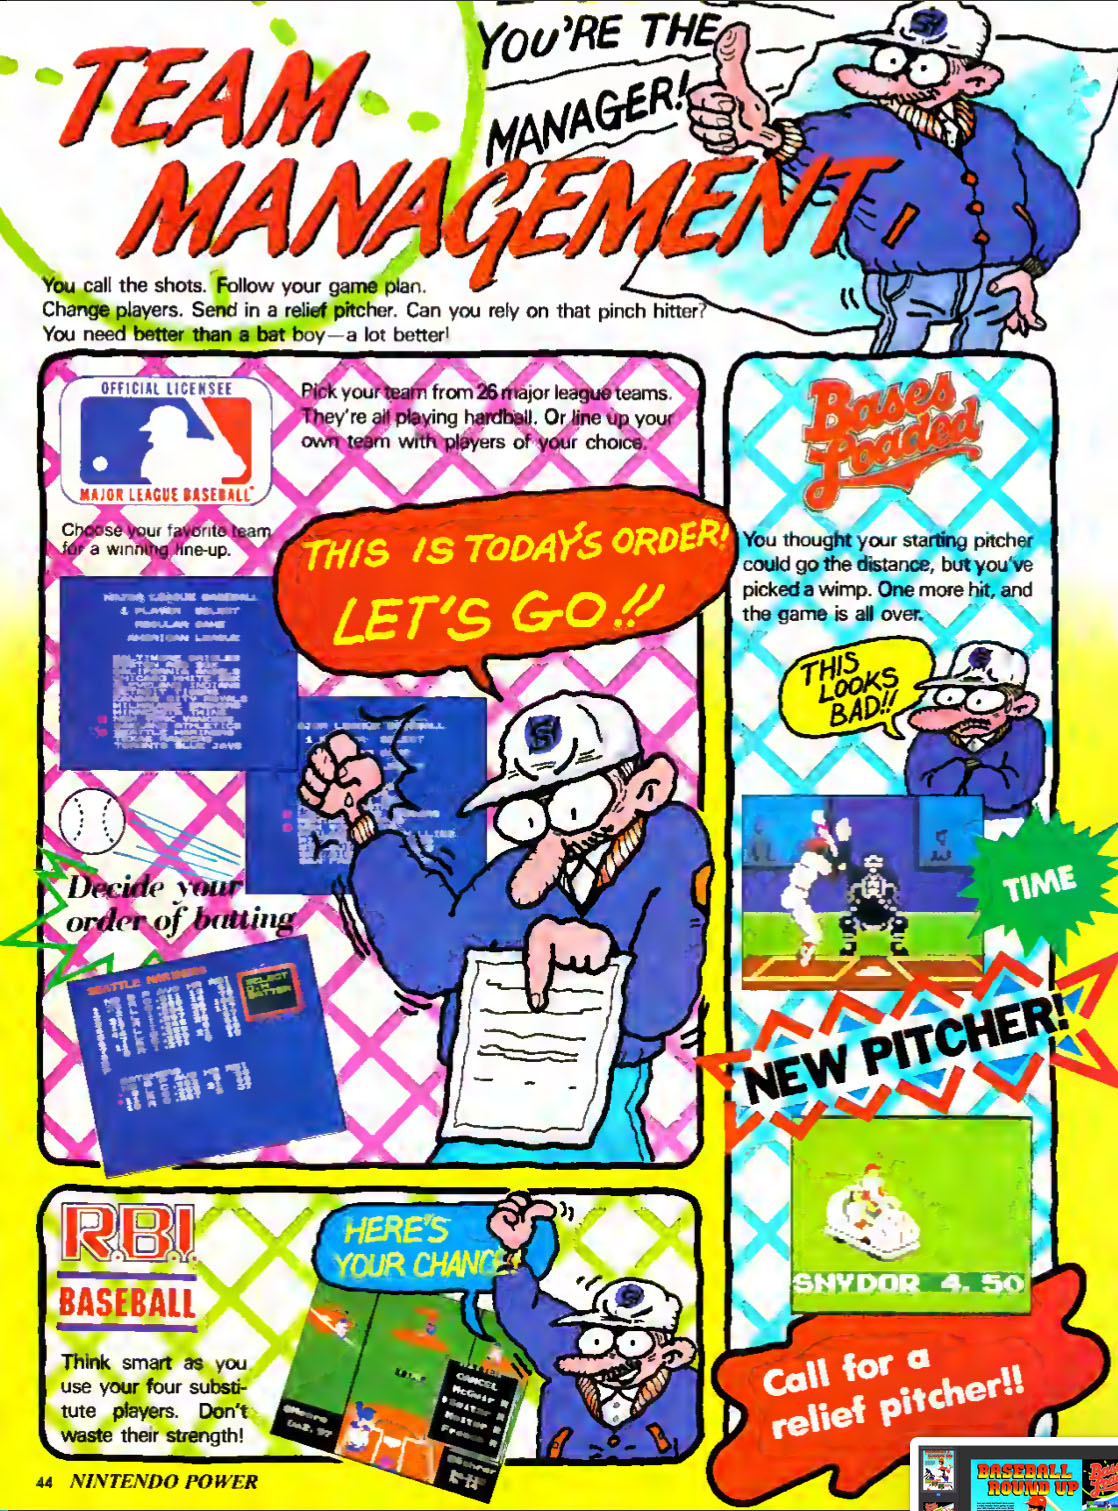 Baseball Round Up, Nintendo Power July-August 1988 page 44